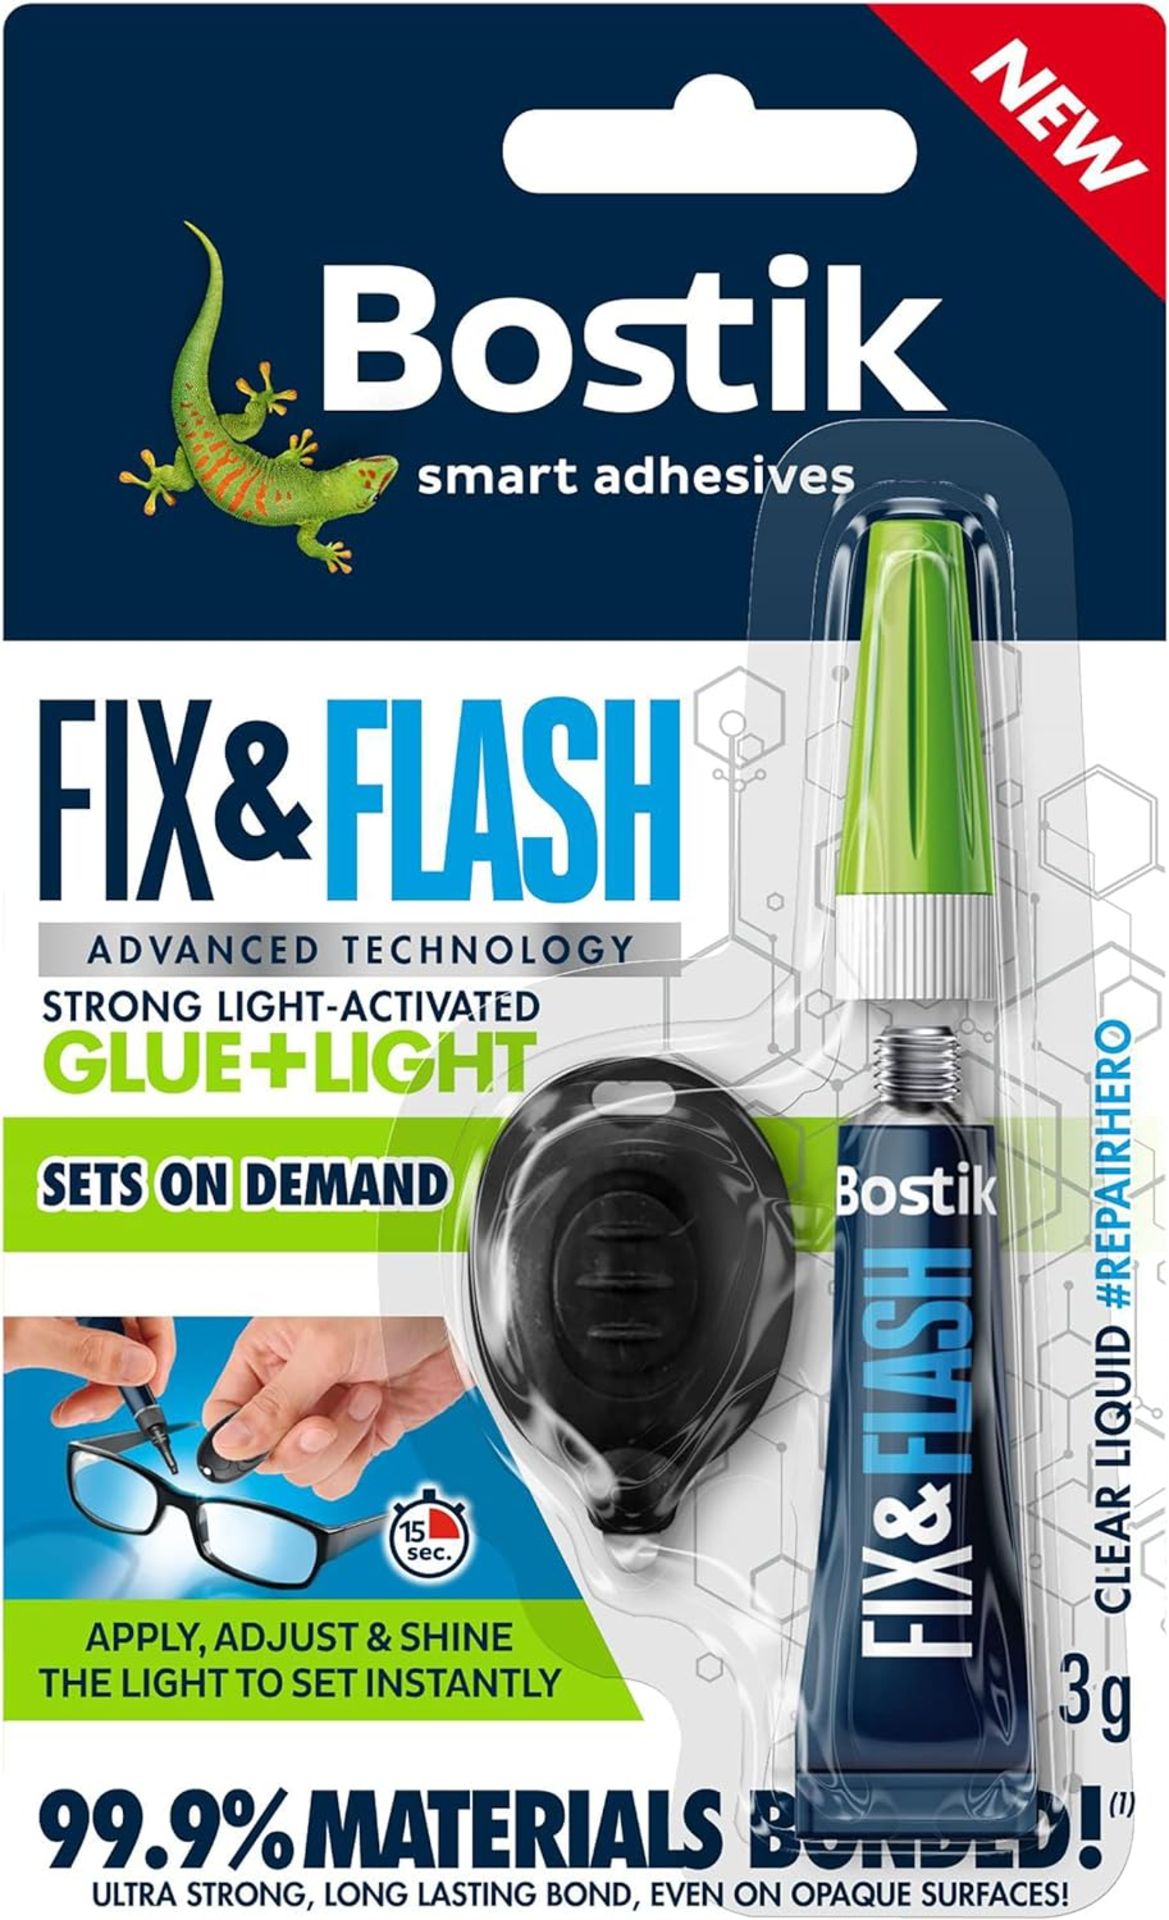 TRADE LOT TO CONTAIN 30x NEW & BOXED PACKS OF 6 BOSTIK Fix & Flash Light-Activated Glue 3g Tube. RRP